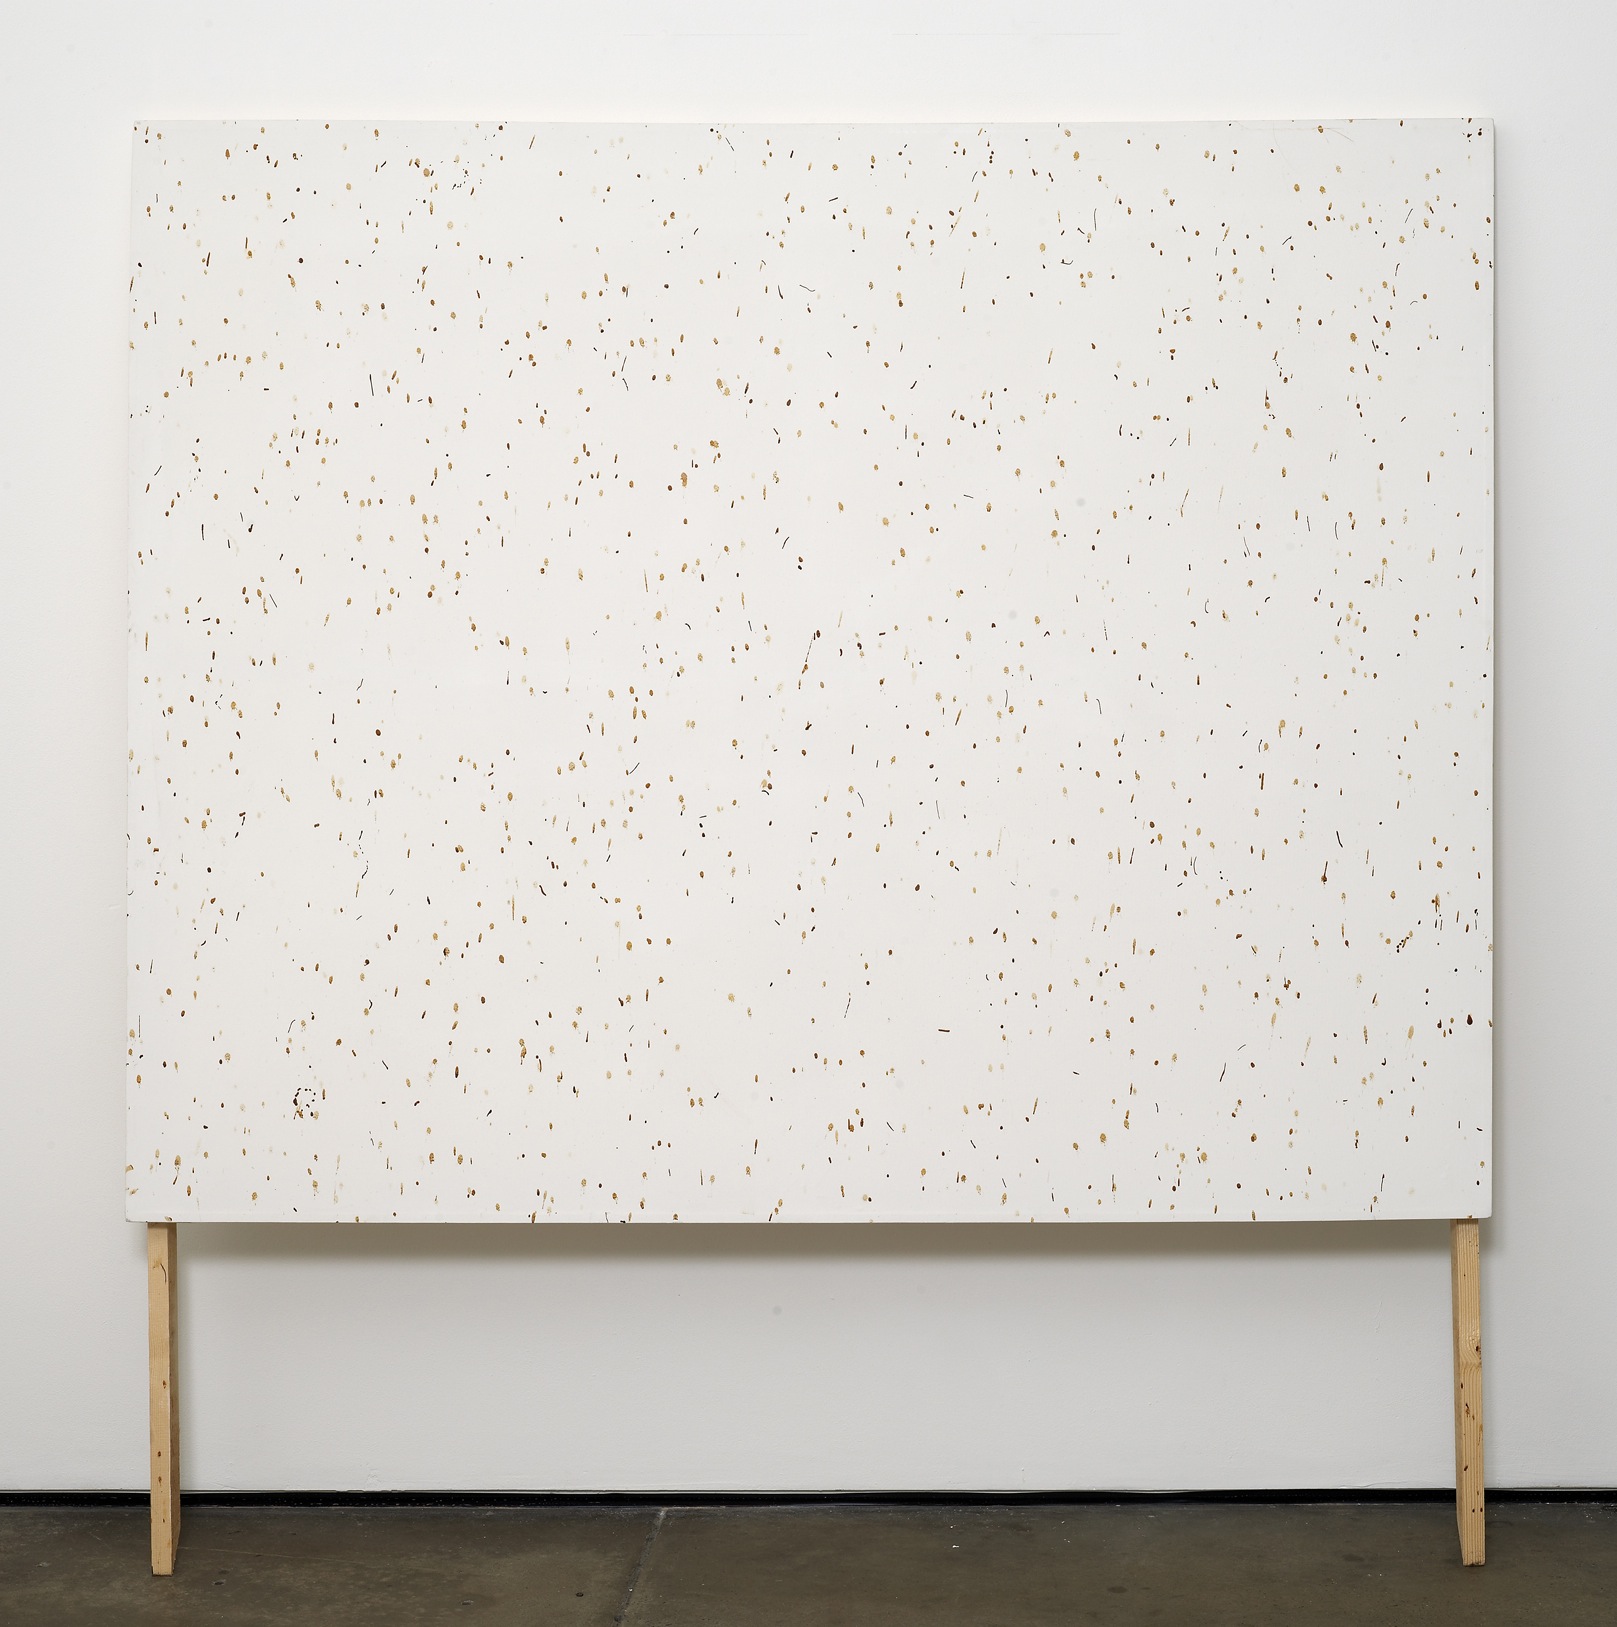     Bee Painting, Large Screen I 2009 Bee droppings on grounded canvas 148 x 120 cm 